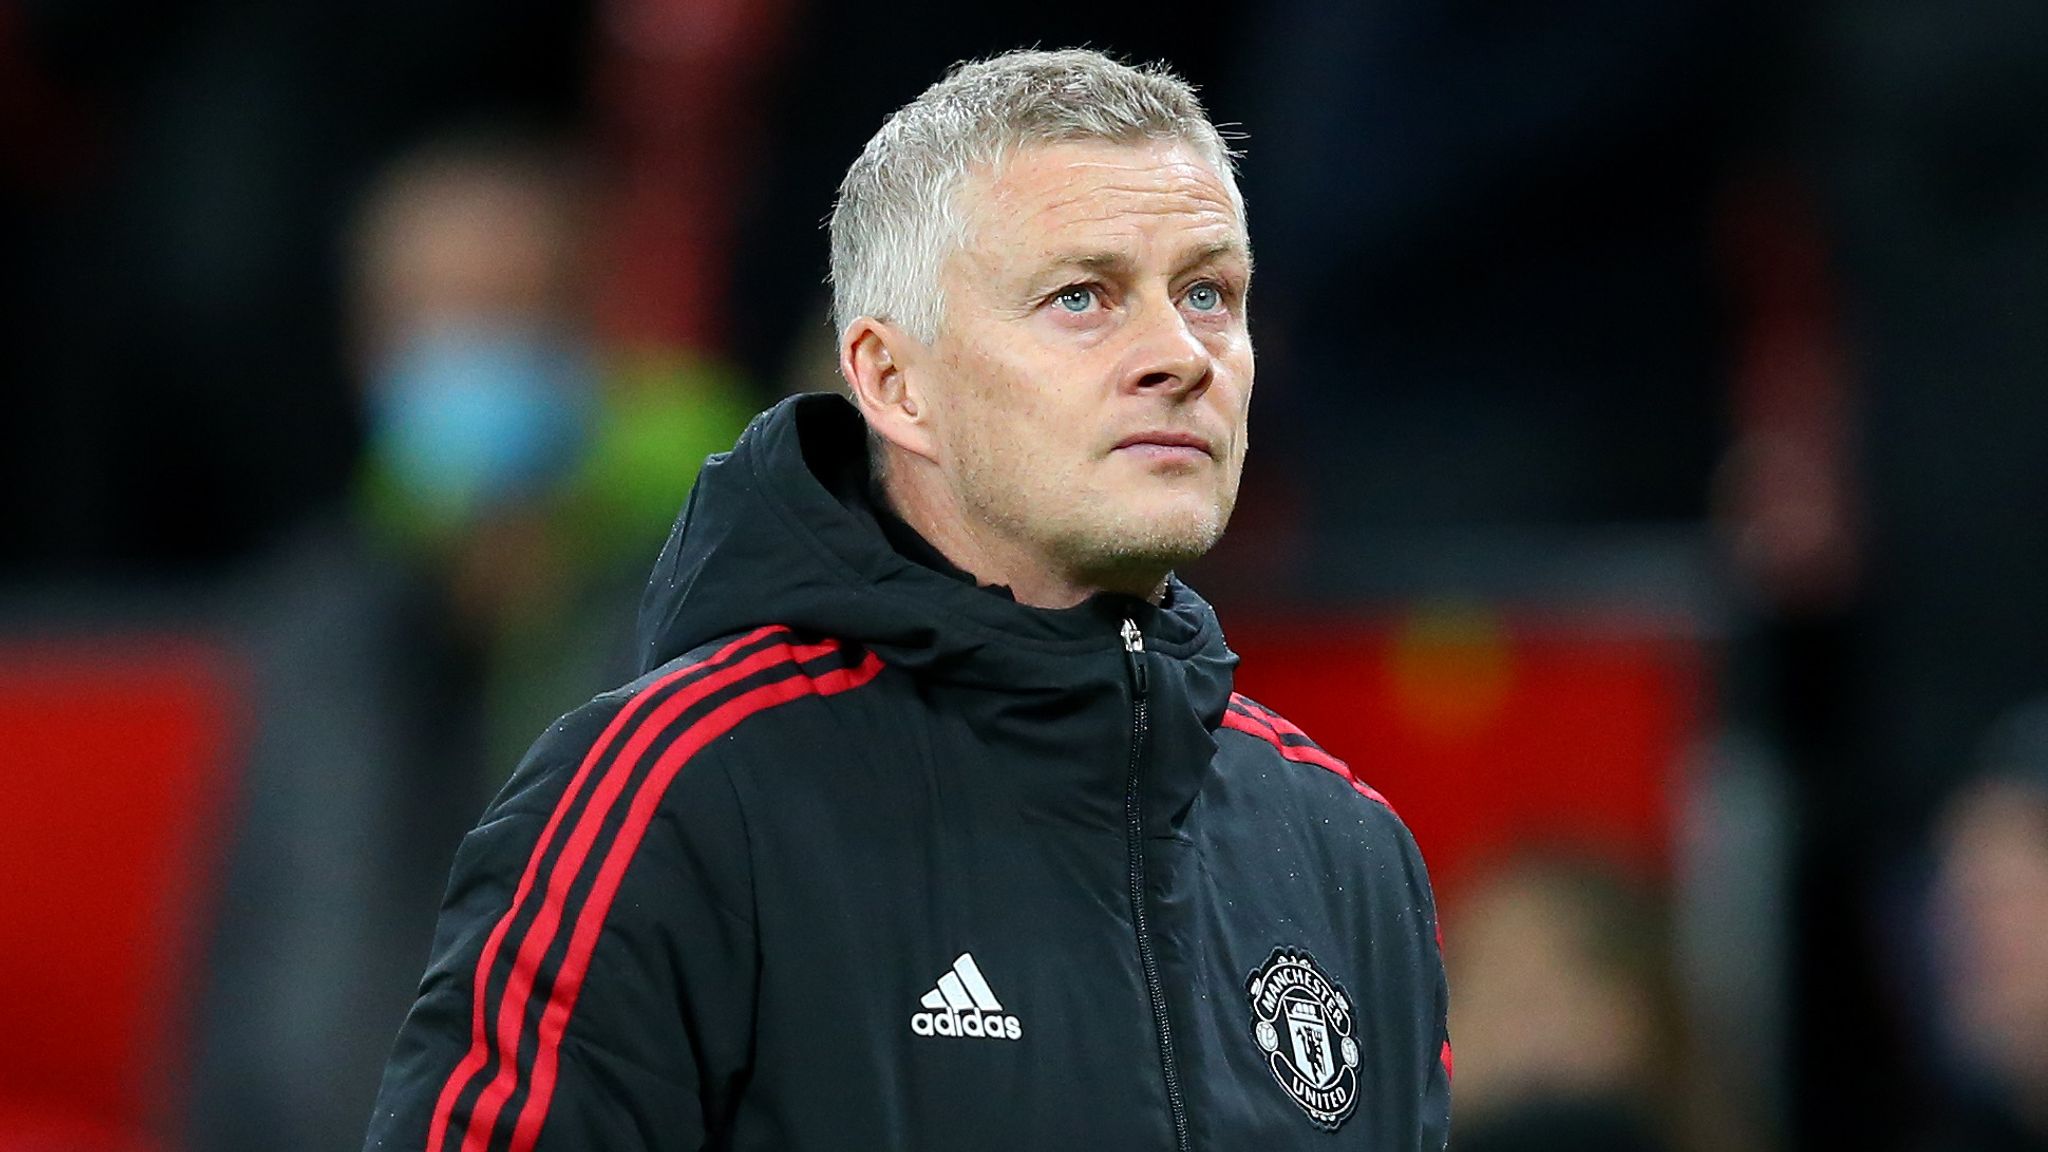 Ole Gunnar Solskjaer Says He Hoped To Have Left Man United In A Better State